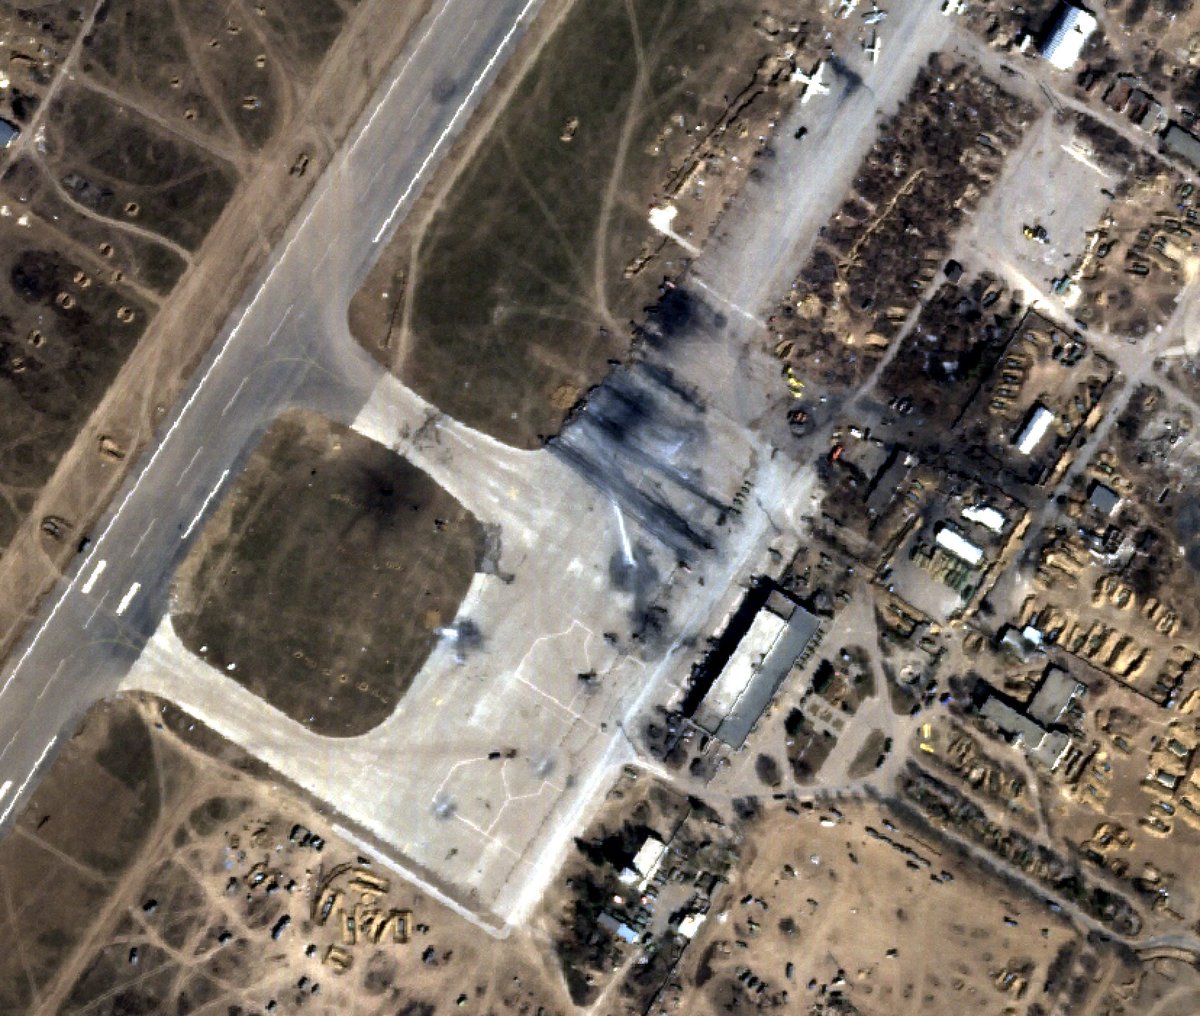 New @Planet satellite imagery from March 21st of Kherson airbase seems to indicate its been emptied of any functional military aircraft and the wrecks have been moved